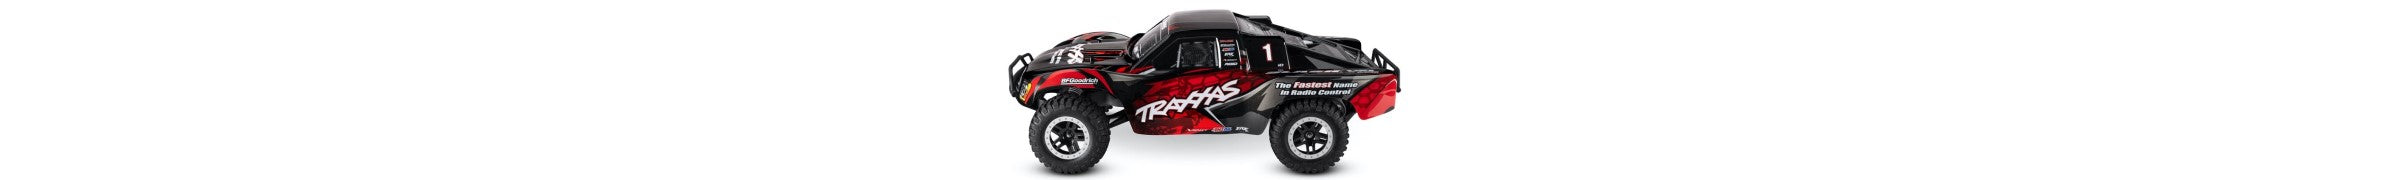 Parts for 58076-74 Traxxas Slash 1/10 VXL 2WD RC Brushless Short Course Truck